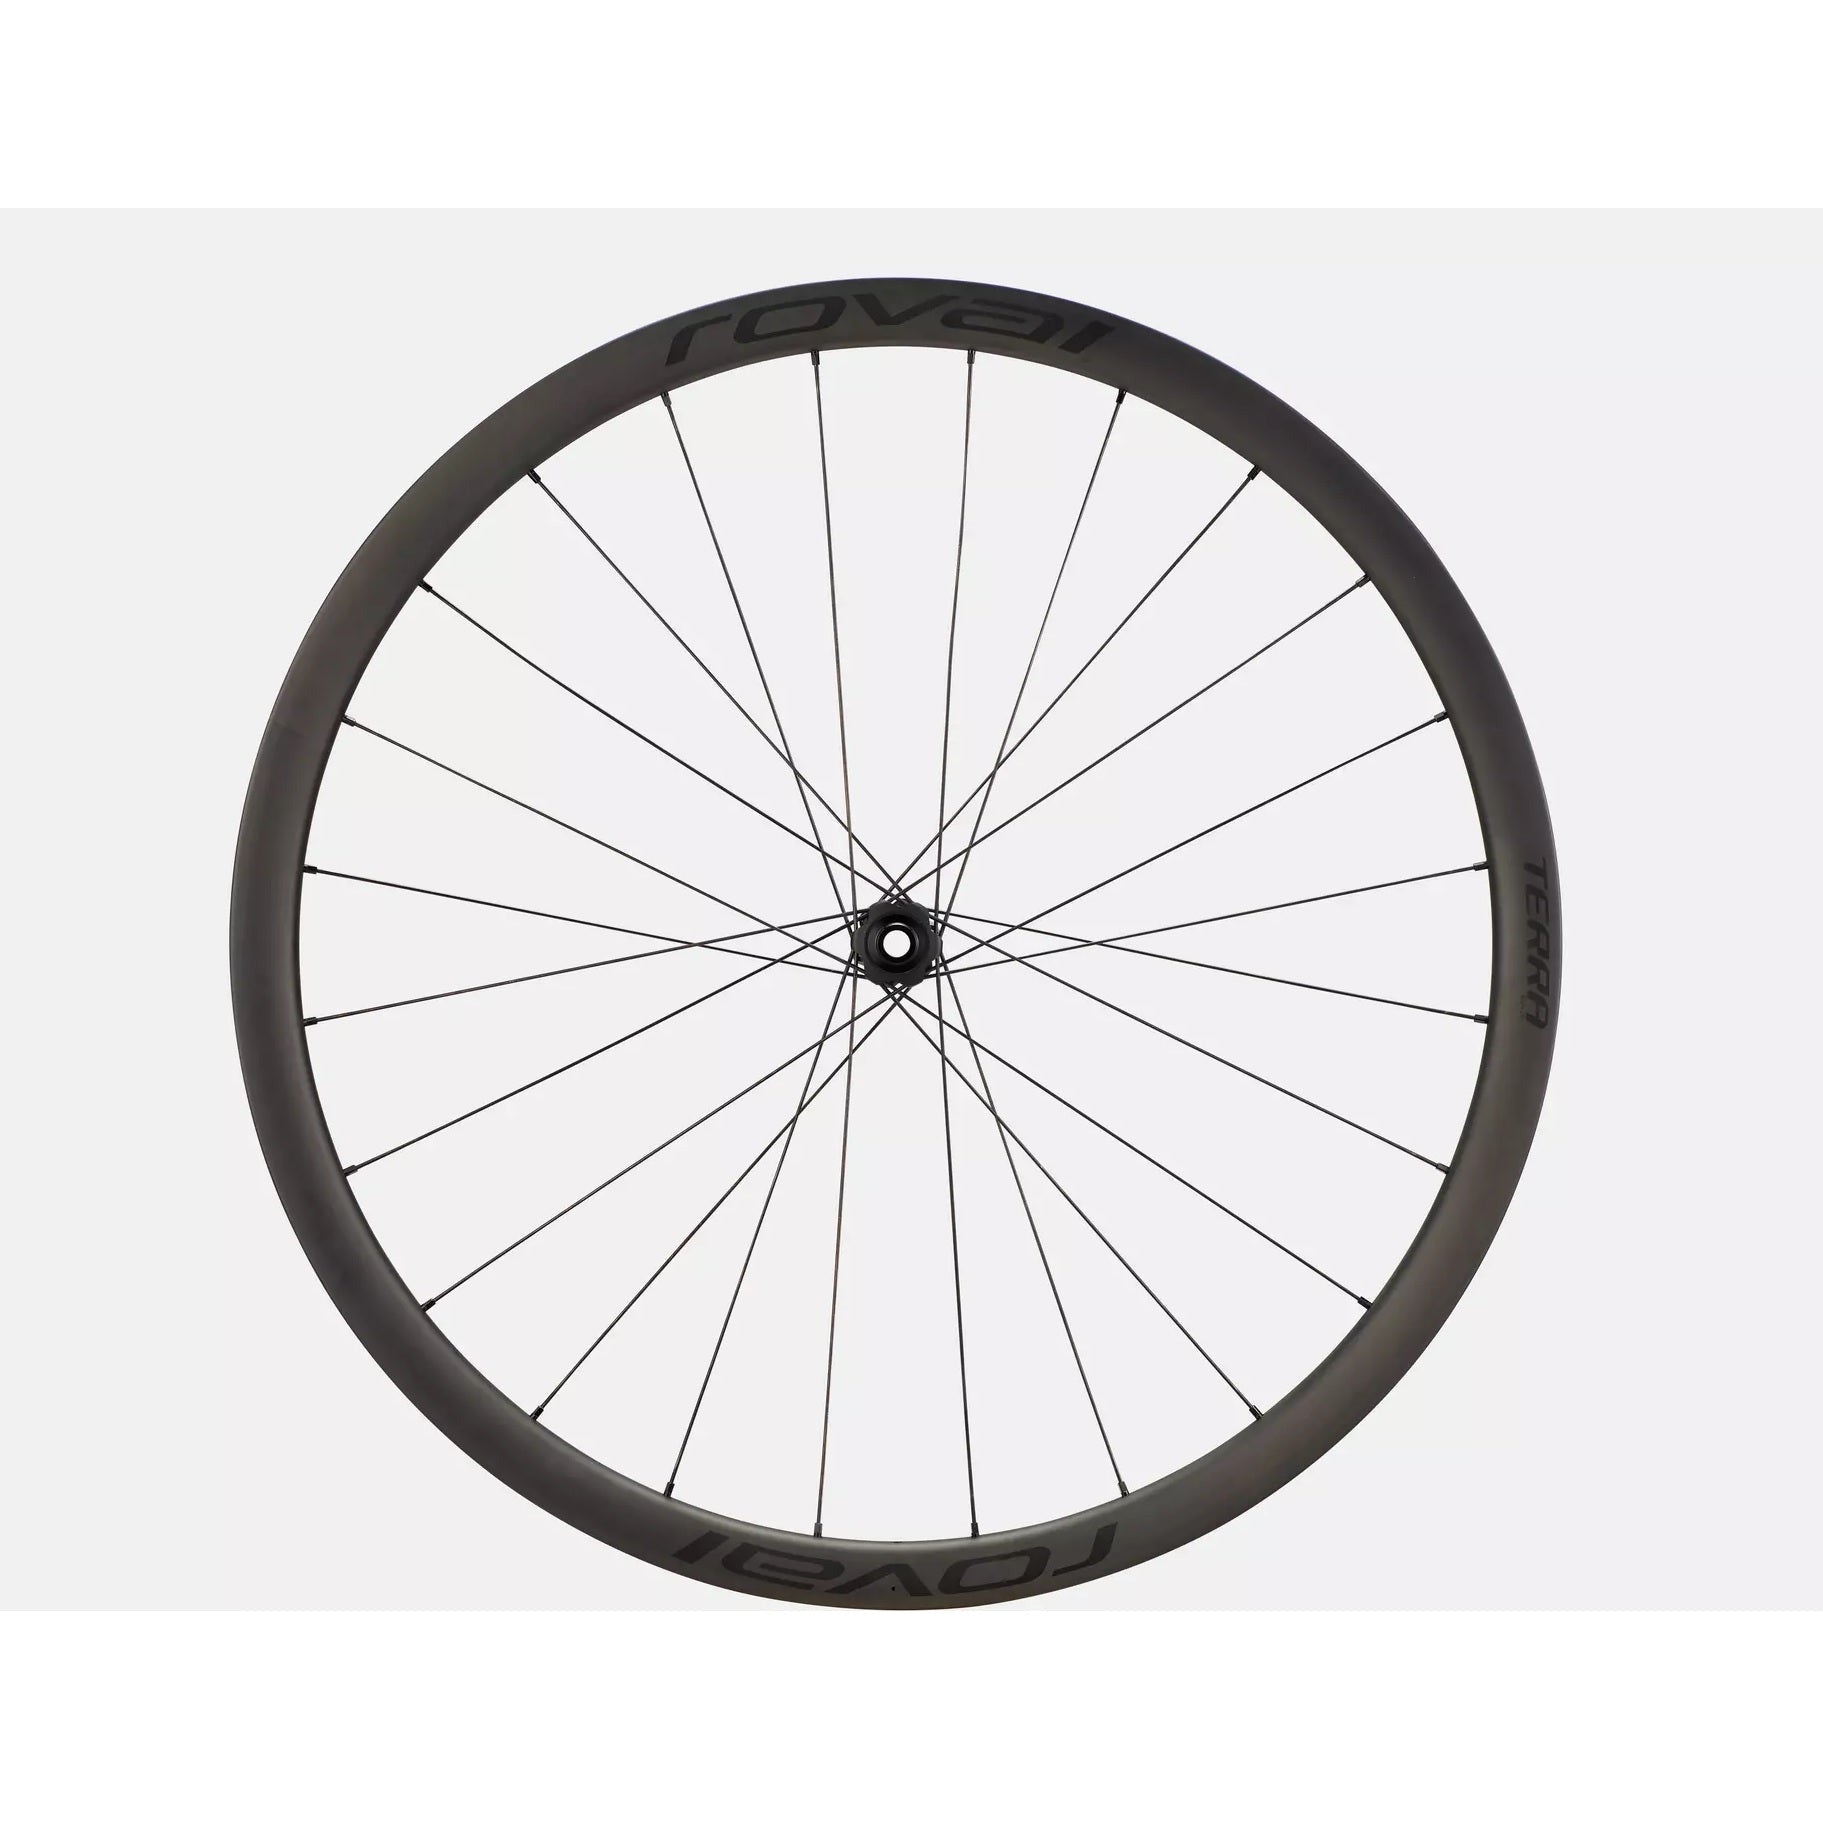 Roval Terra CL Clincher Disc Brake Road Bicycle Wheelset